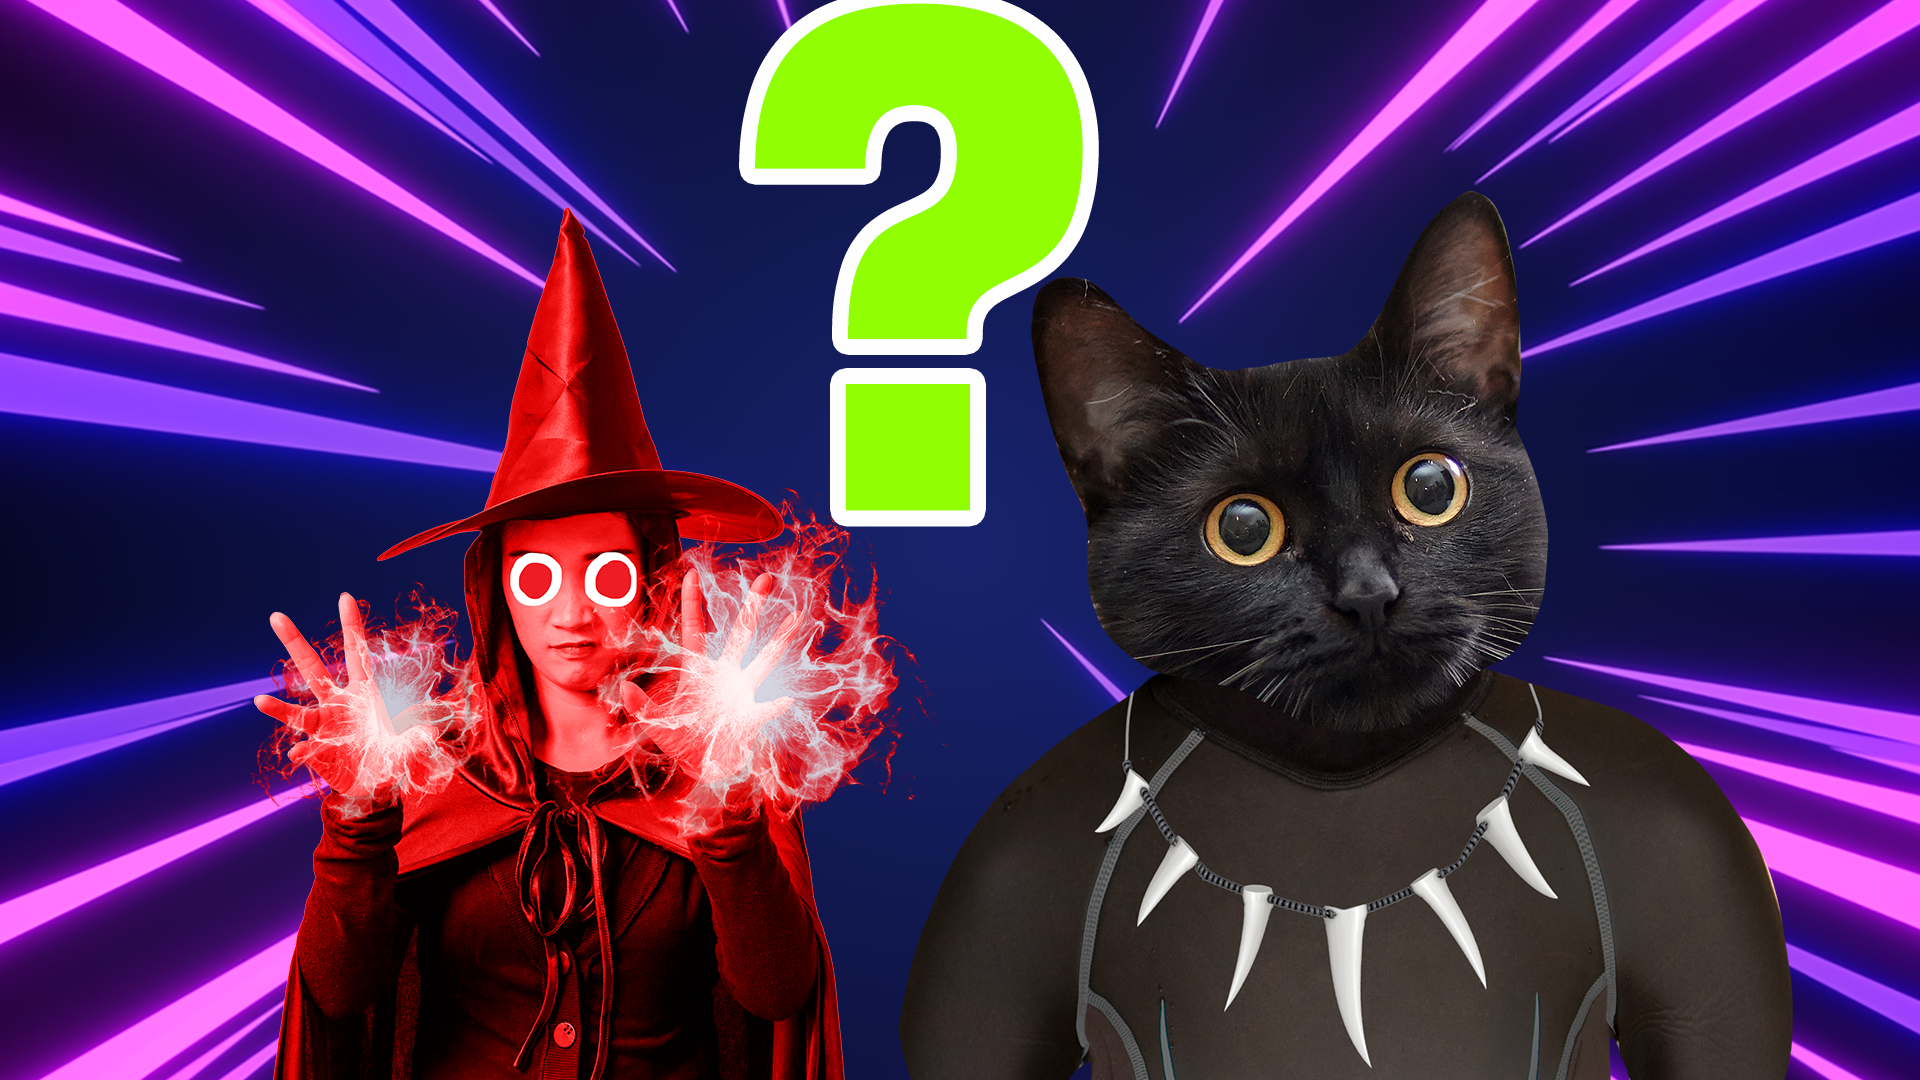 Scarlet Witch and Black Panther cat on laser background with green question mark